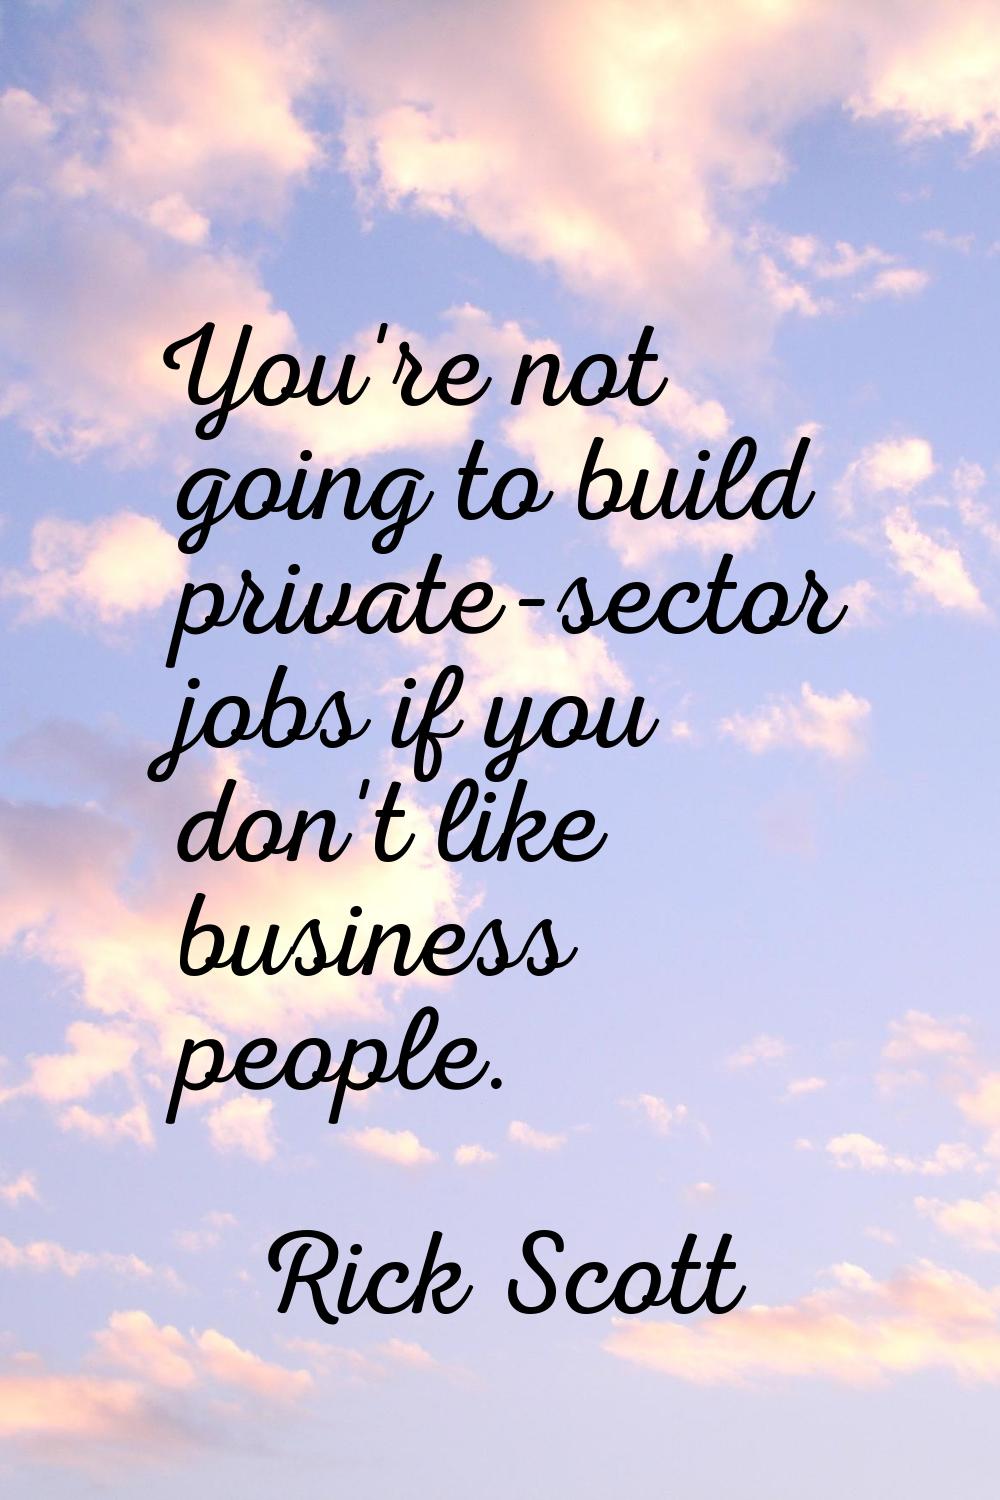 You're not going to build private-sector jobs if you don't like business people.